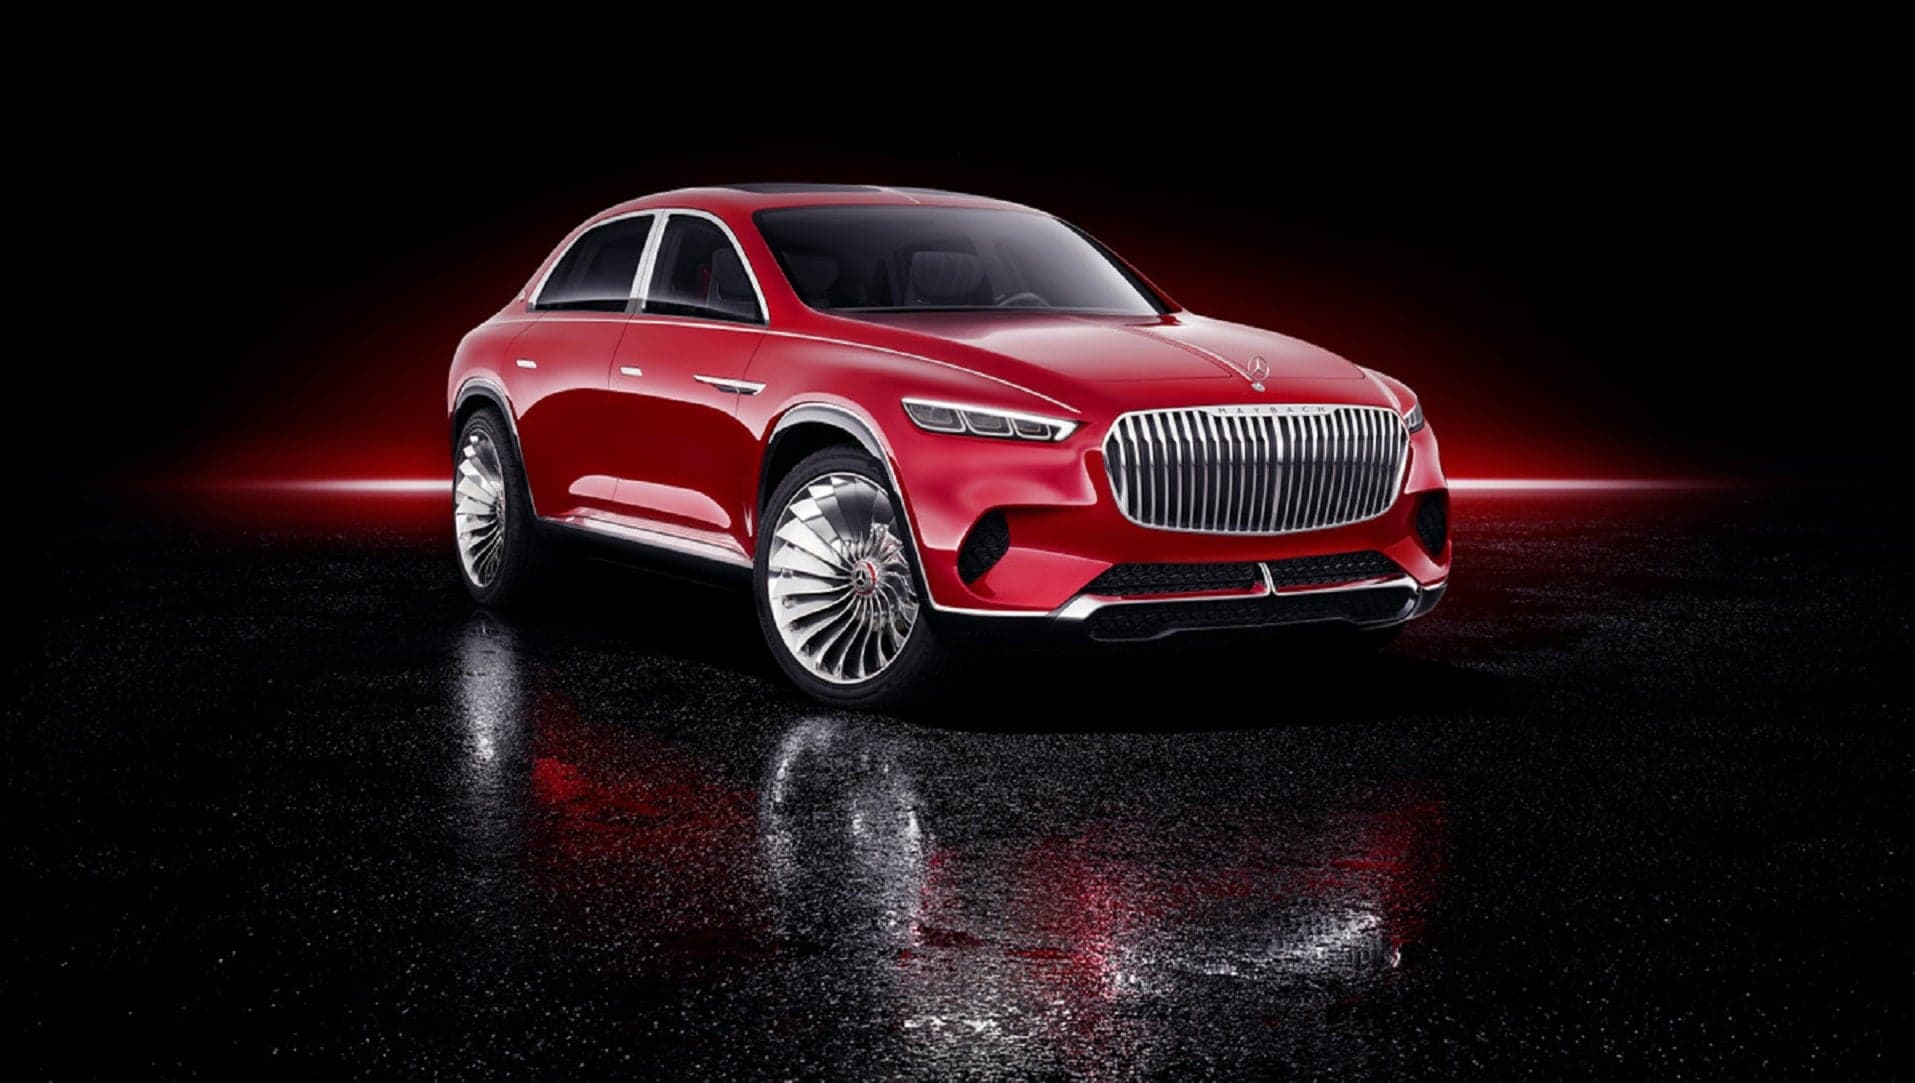 The $200,000 Mercedes-Maybach GLS Will Be the Most Expensive Car Built in the US